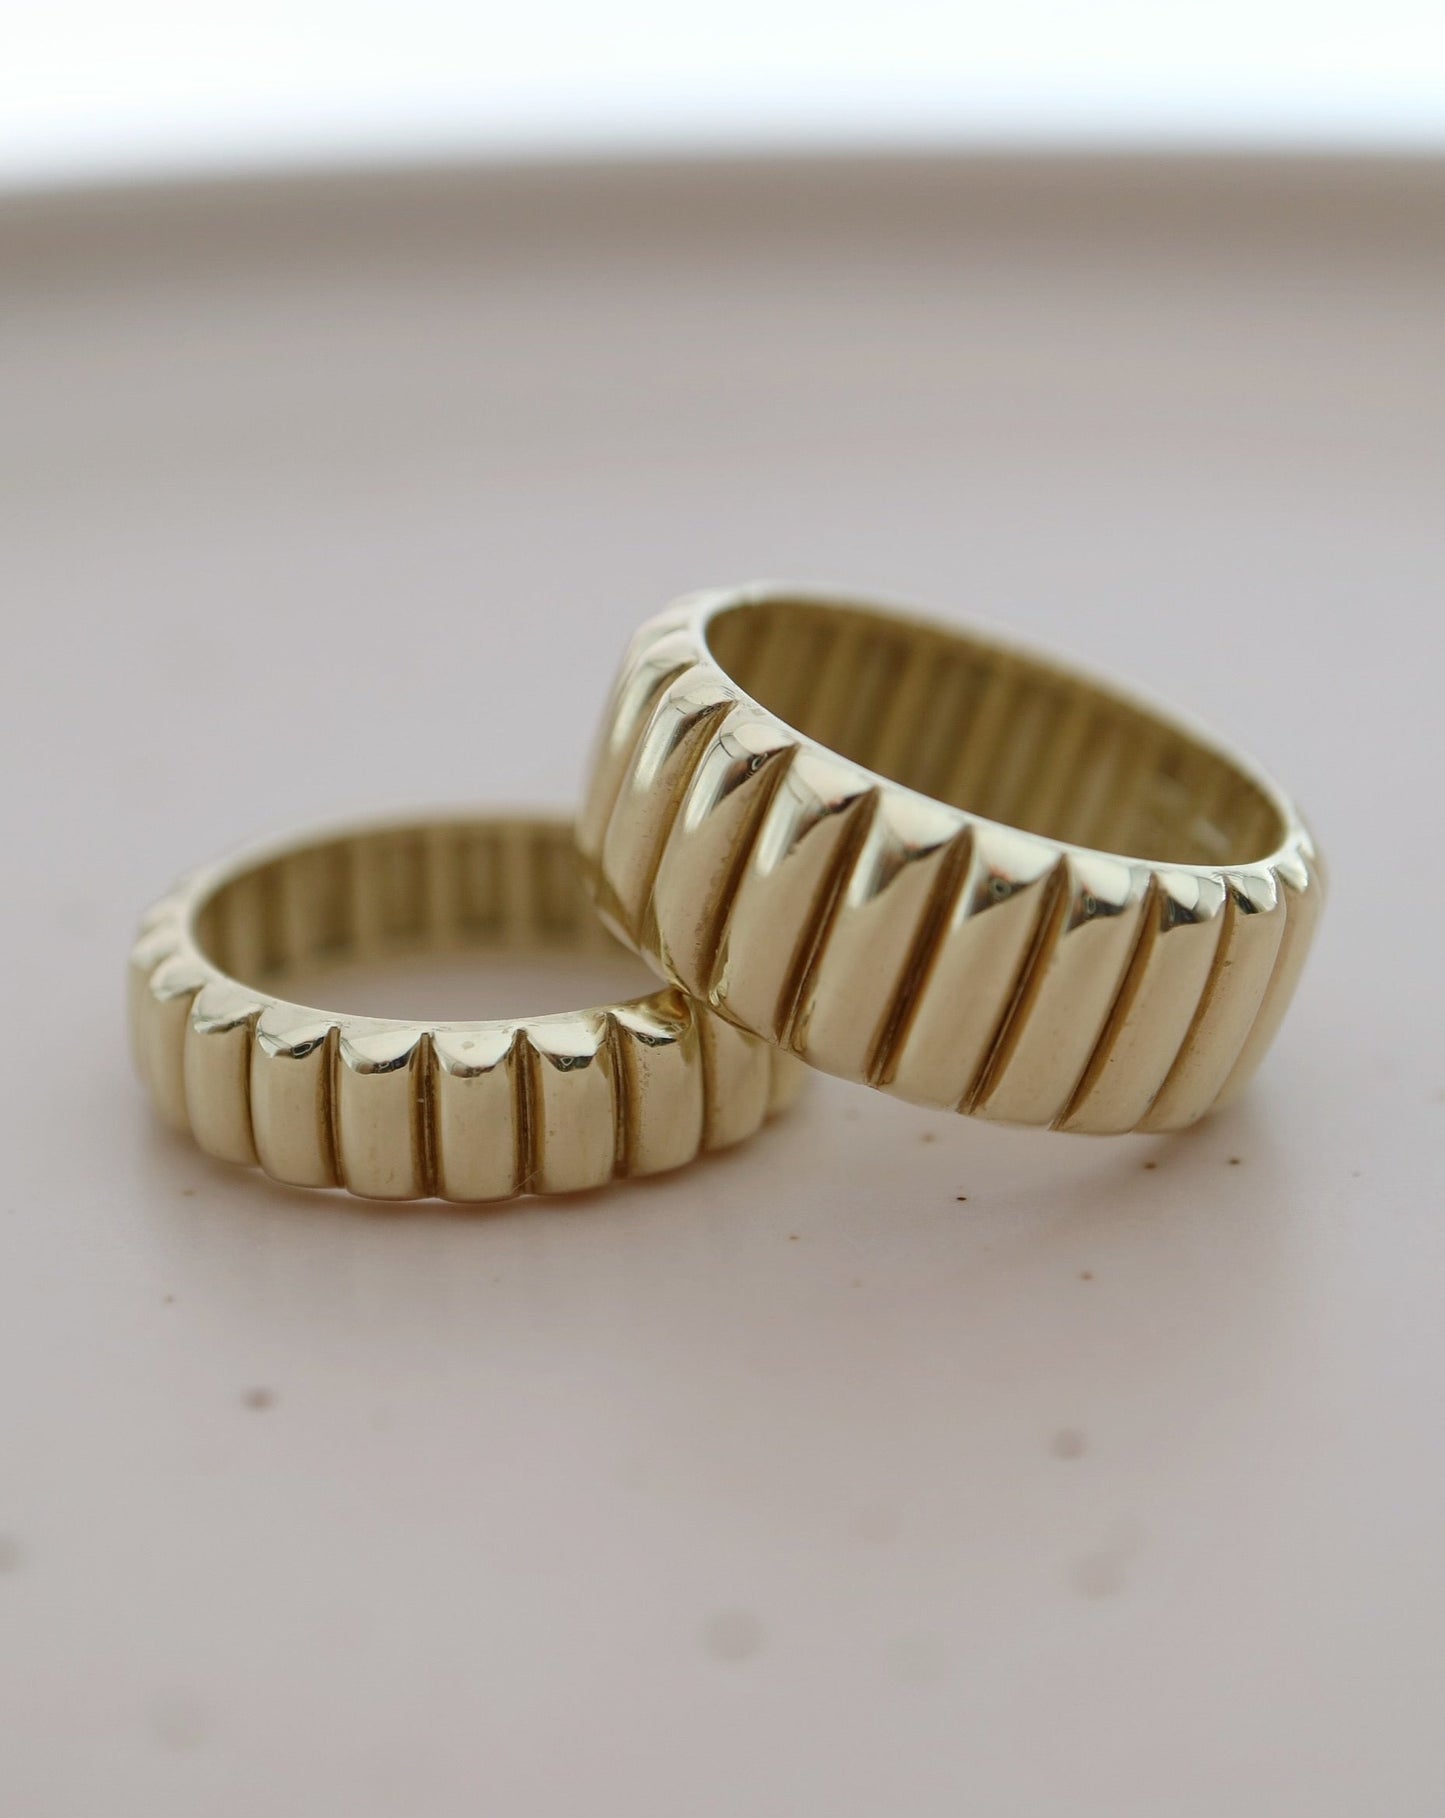 9kt gold Octavia Rings from Collective & Co. jewellery